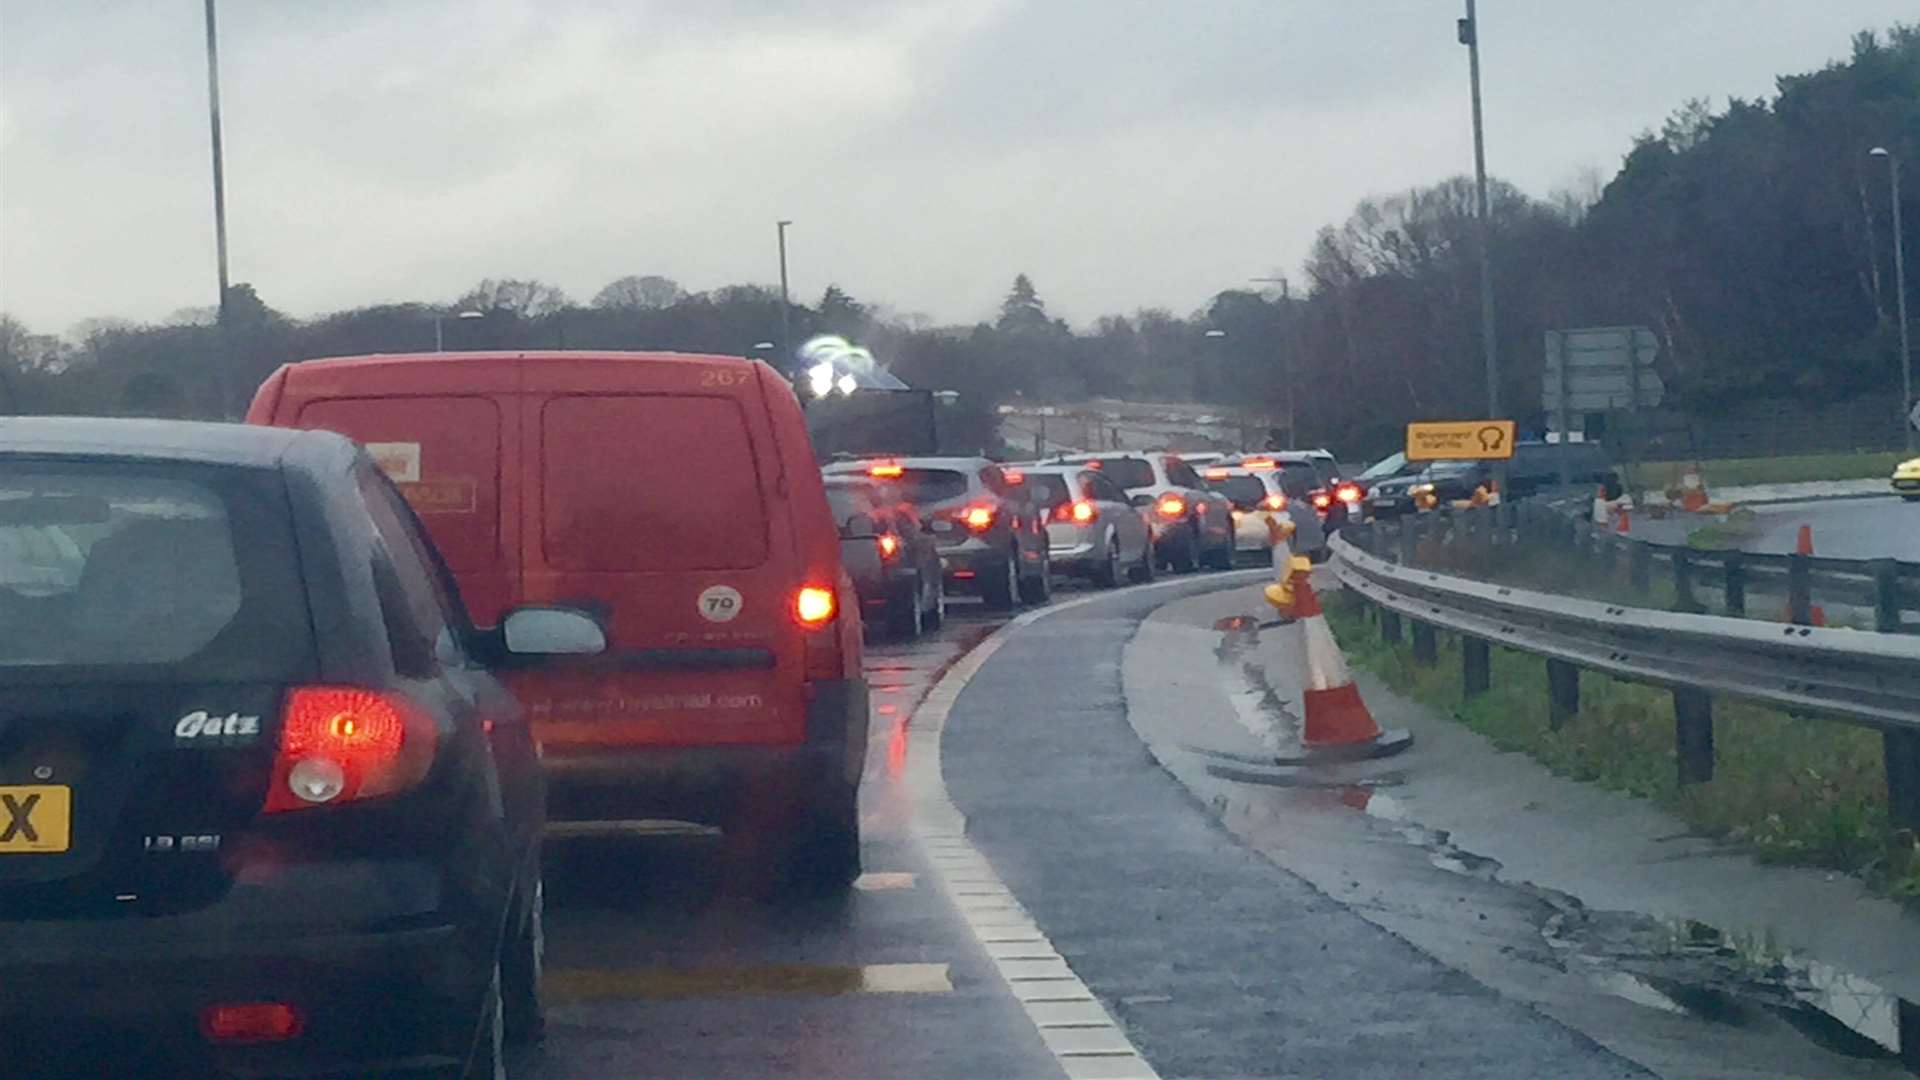 Gridlock on the A21 following the crash